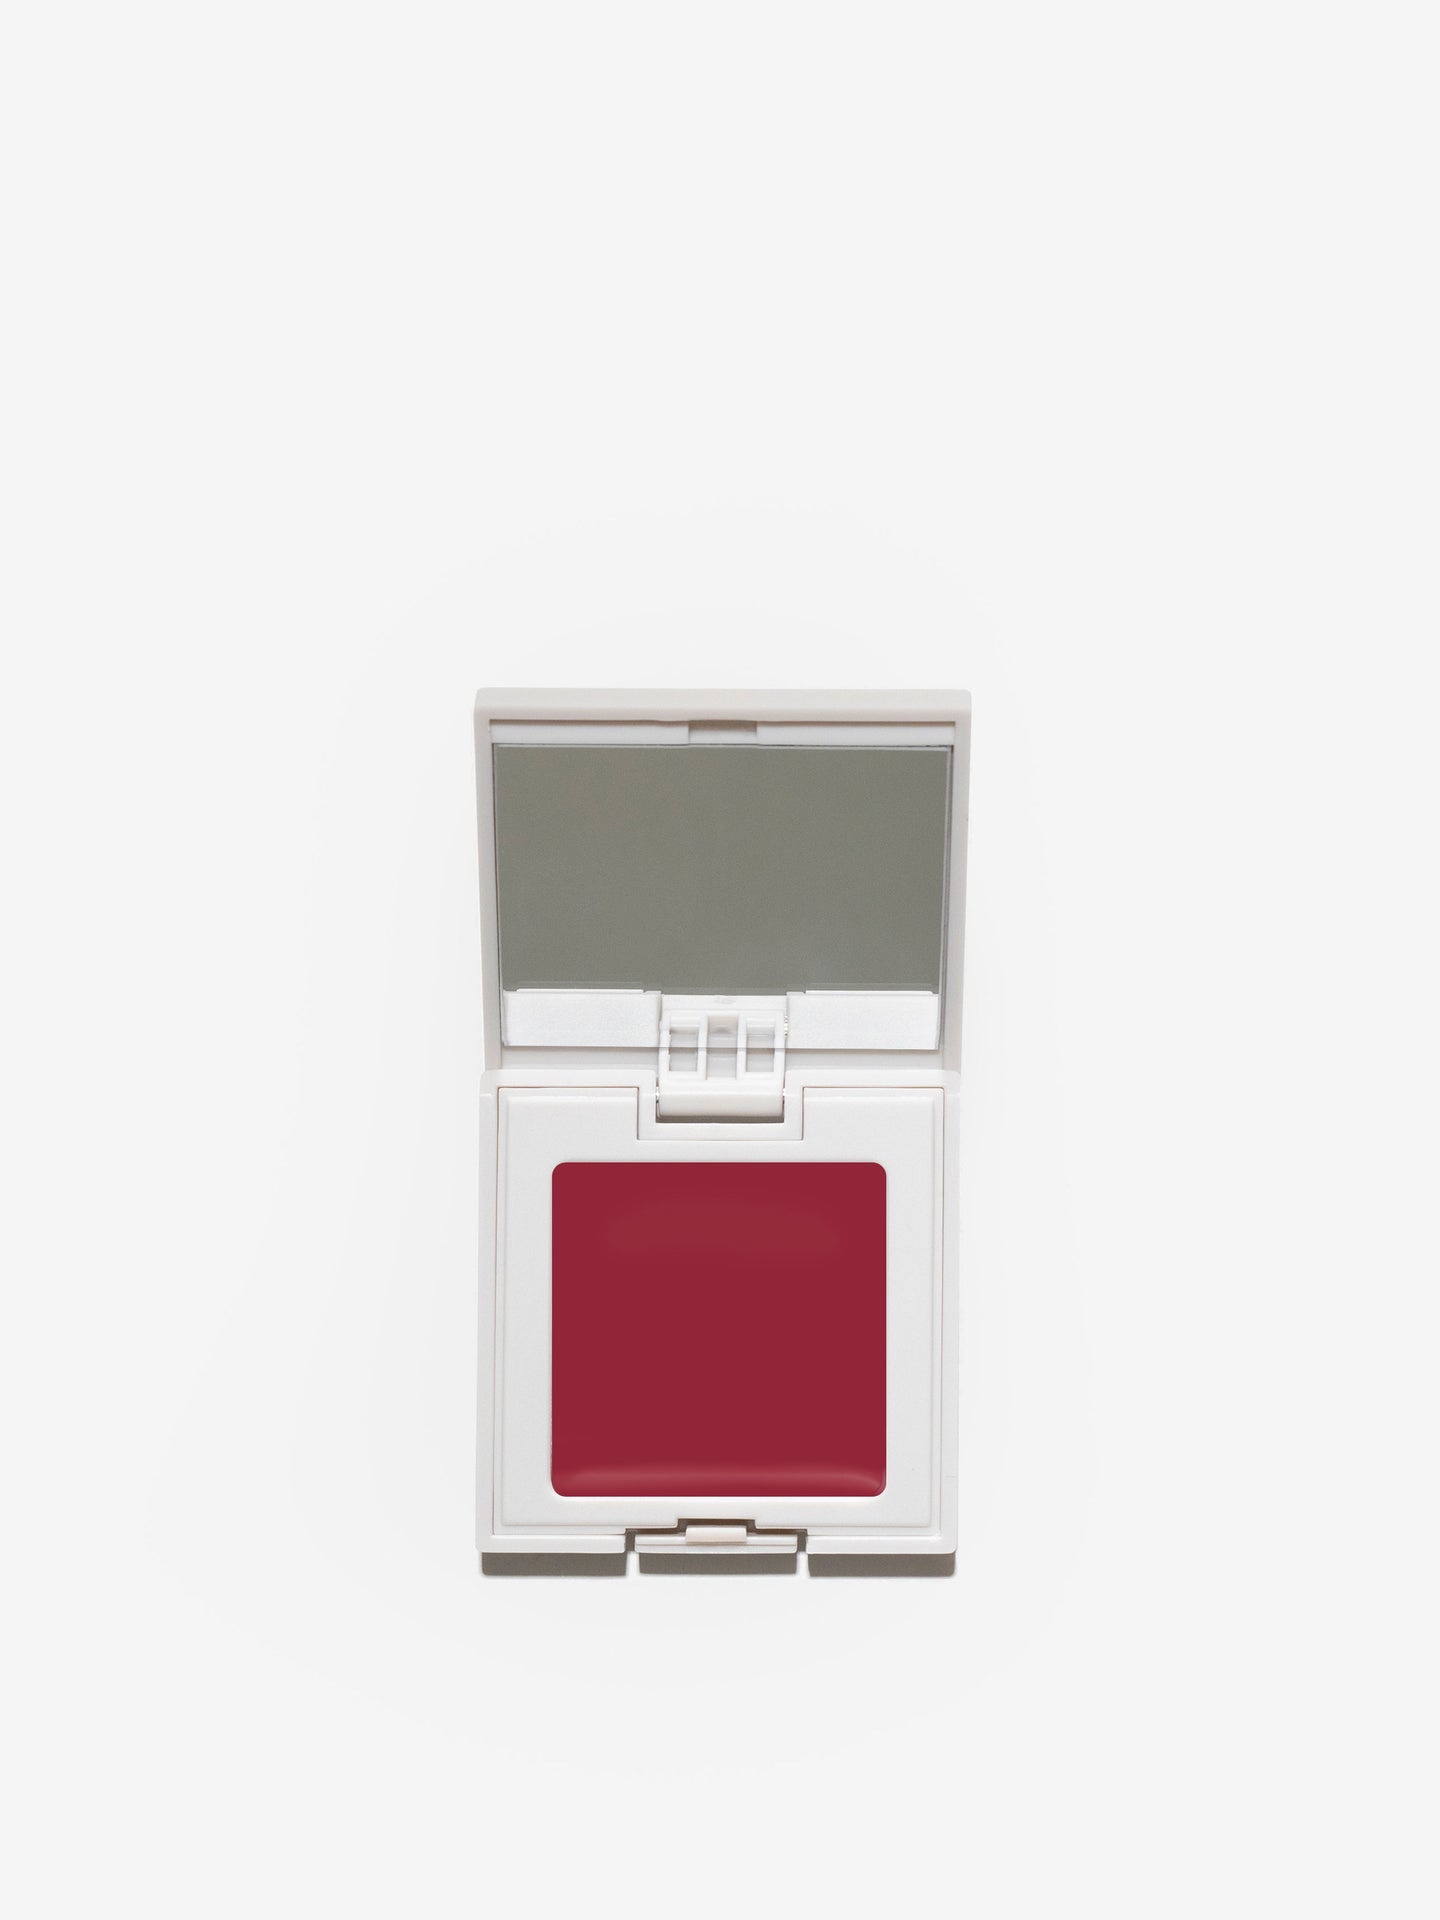 FRONT IMAGE OF REFY CREAM BLUSH IN SHADE CHERRY